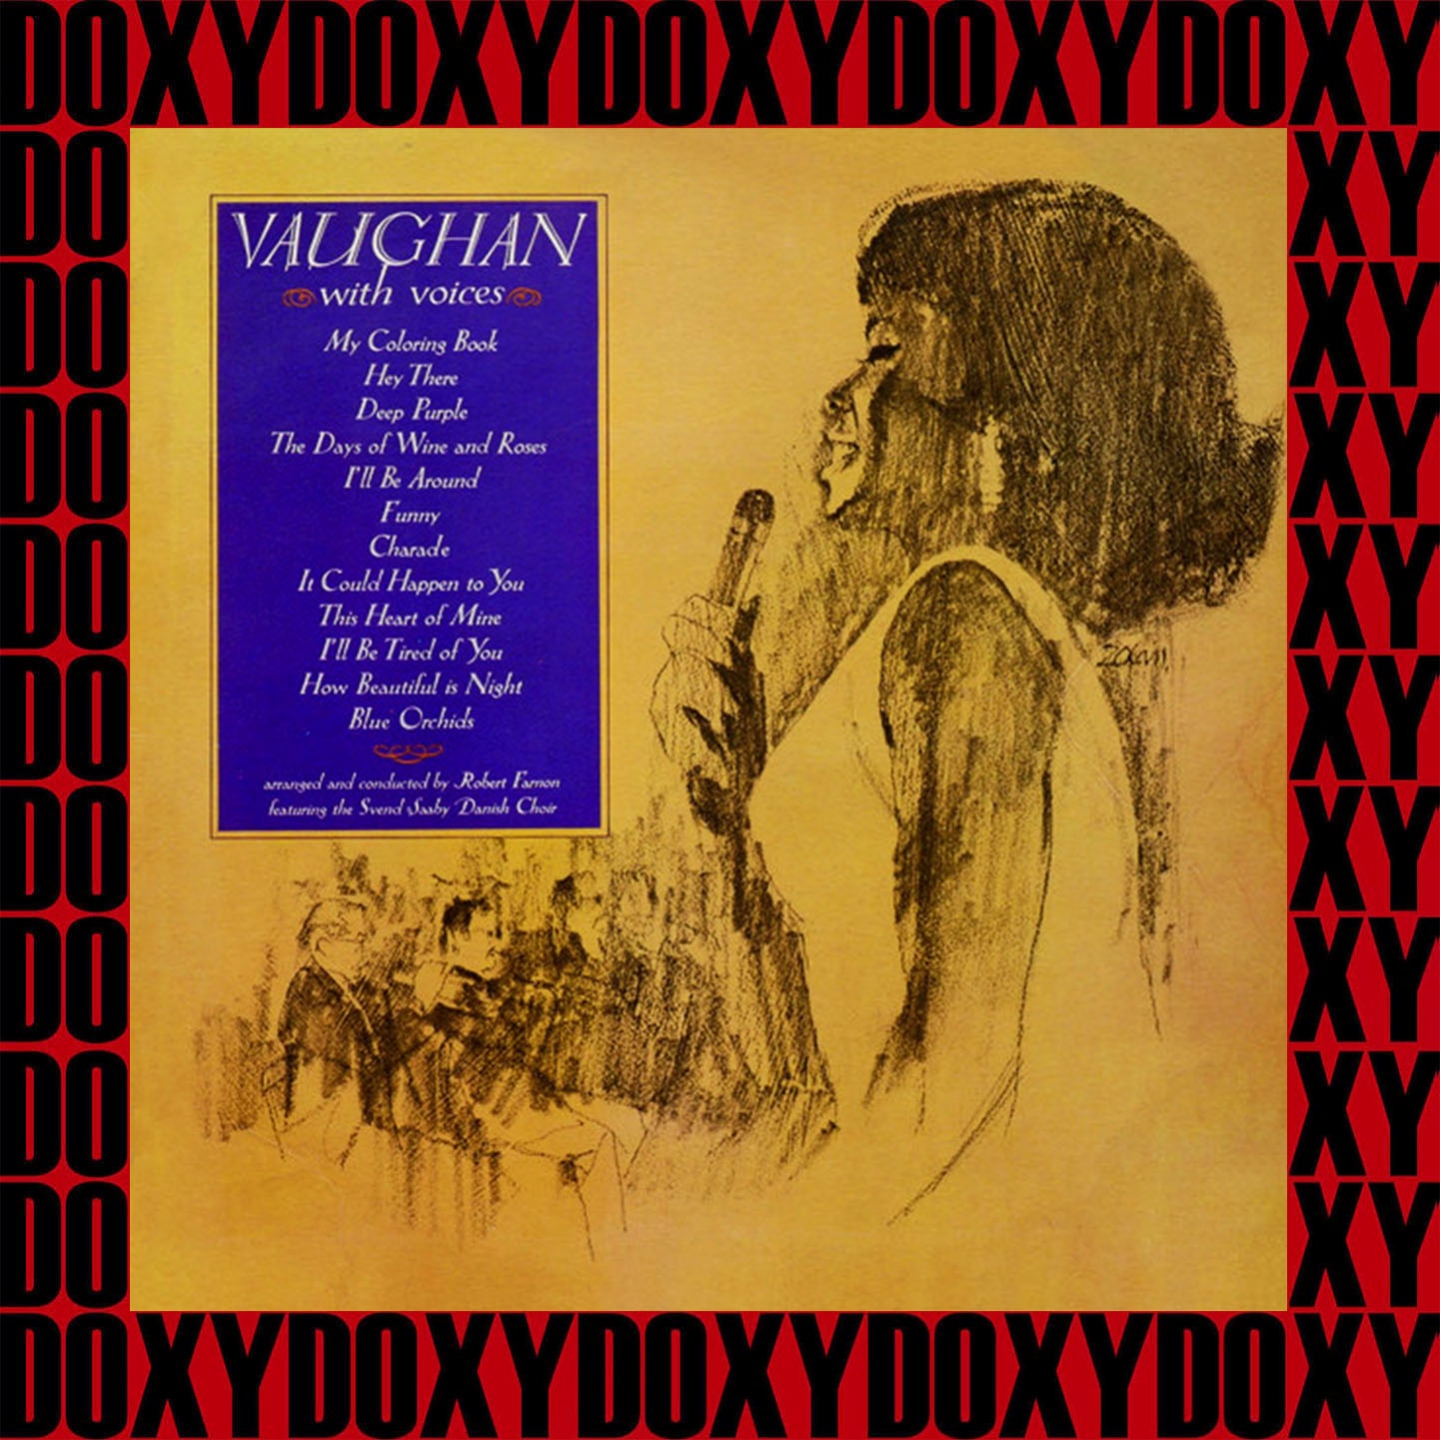 Vaughan With Voices (Exclusive Content, Remastered Version) (Doxy Collection)